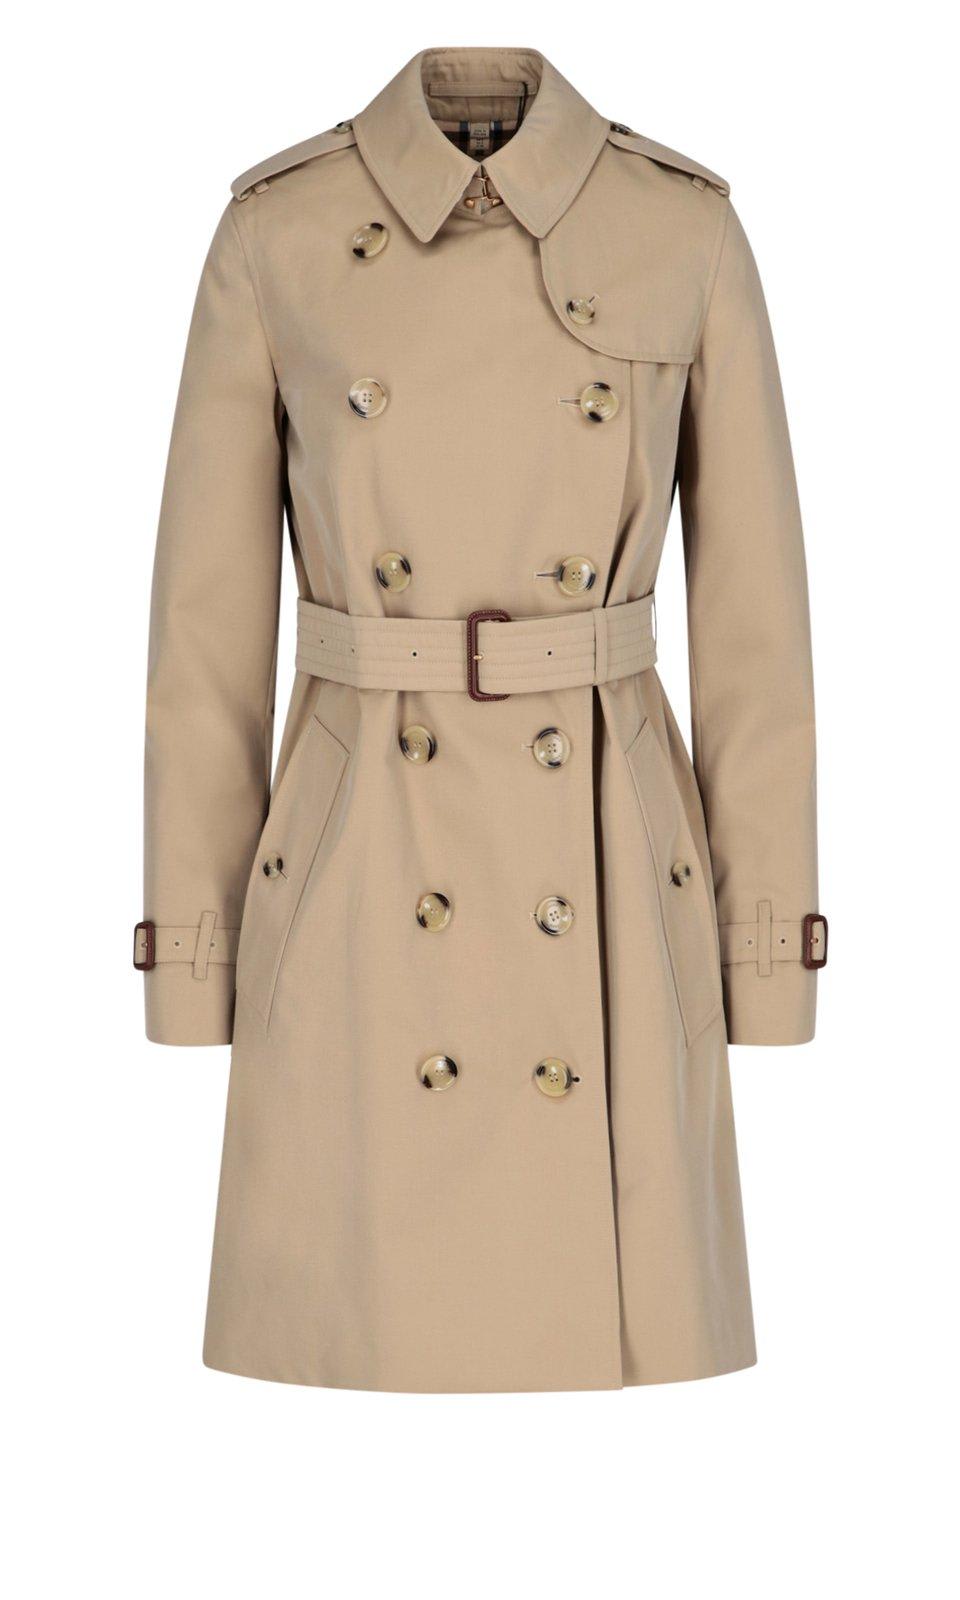 Burberry Button Detailed Kensington Trench Coat